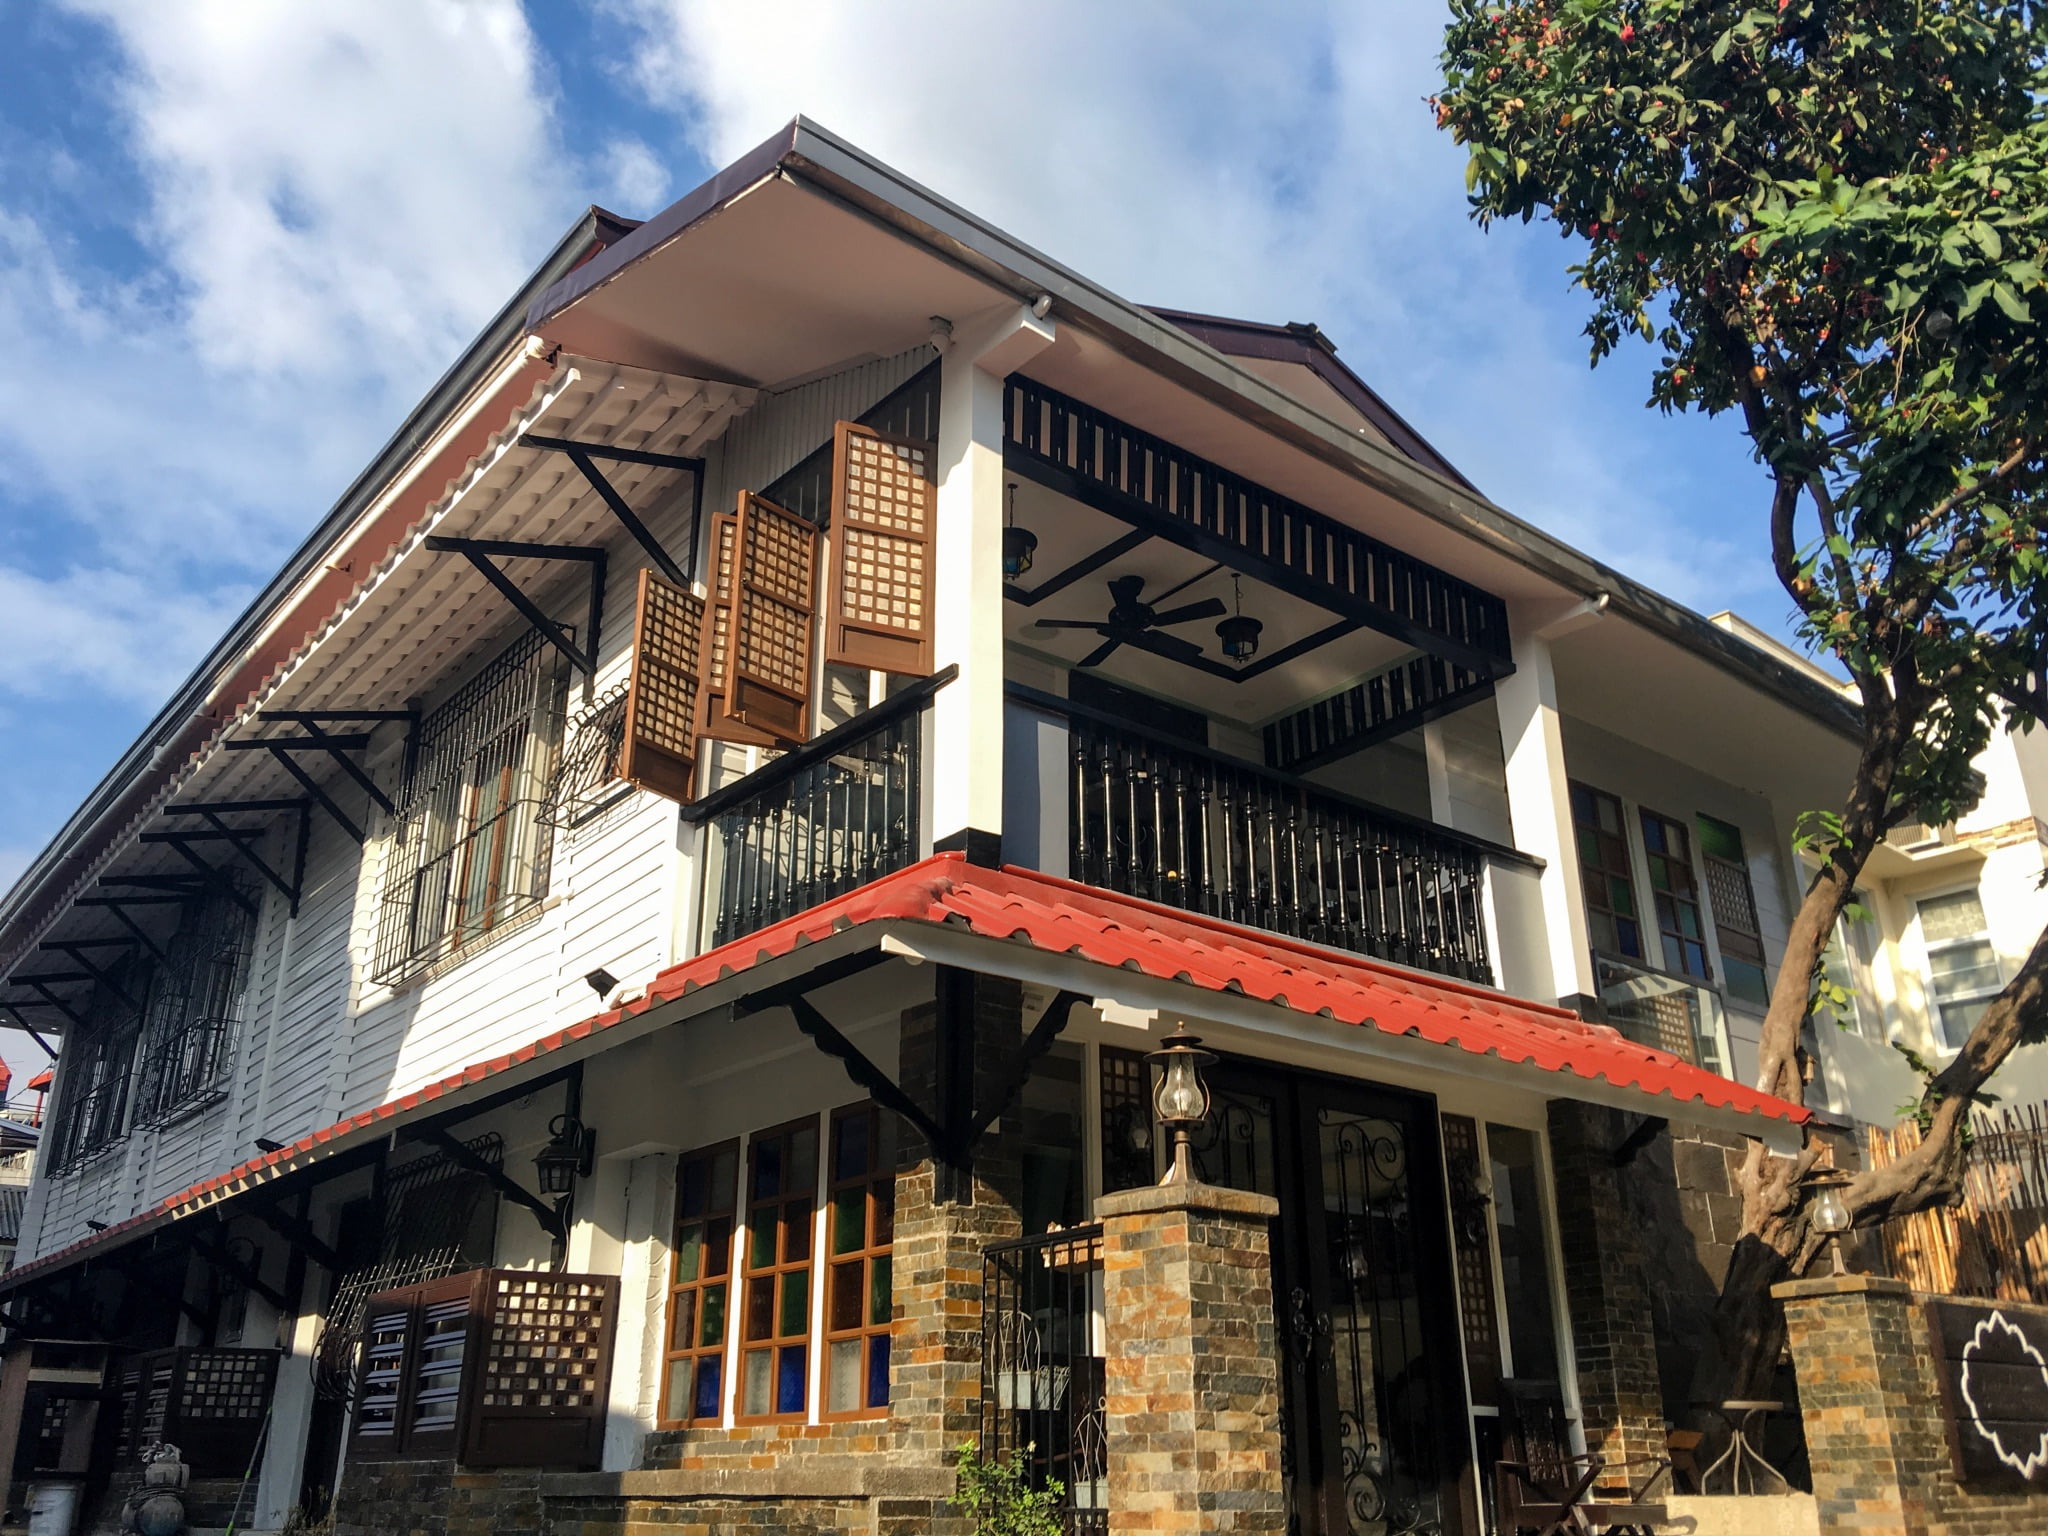 Park Avenue Guesthouse 2443: Spanish-Inspired Guesthouse in the Heart of Pasay